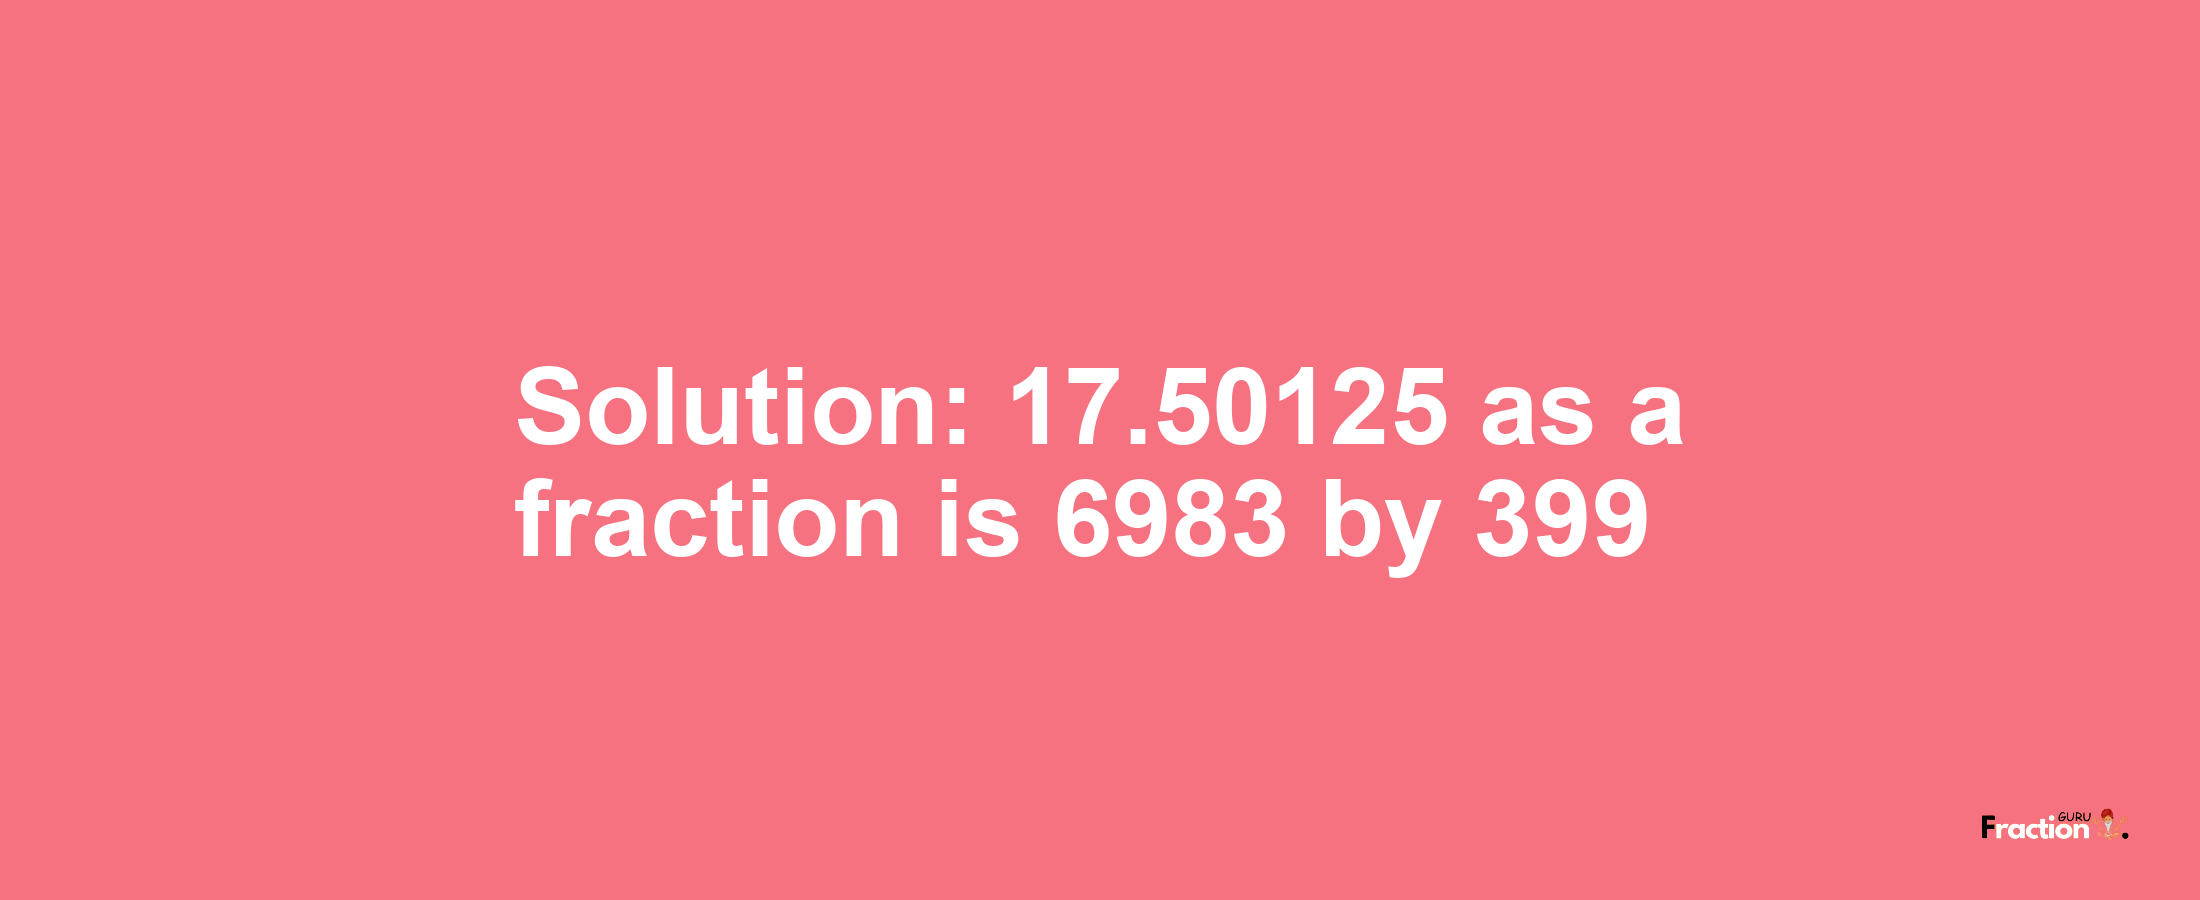 Solution:17.50125 as a fraction is 6983/399